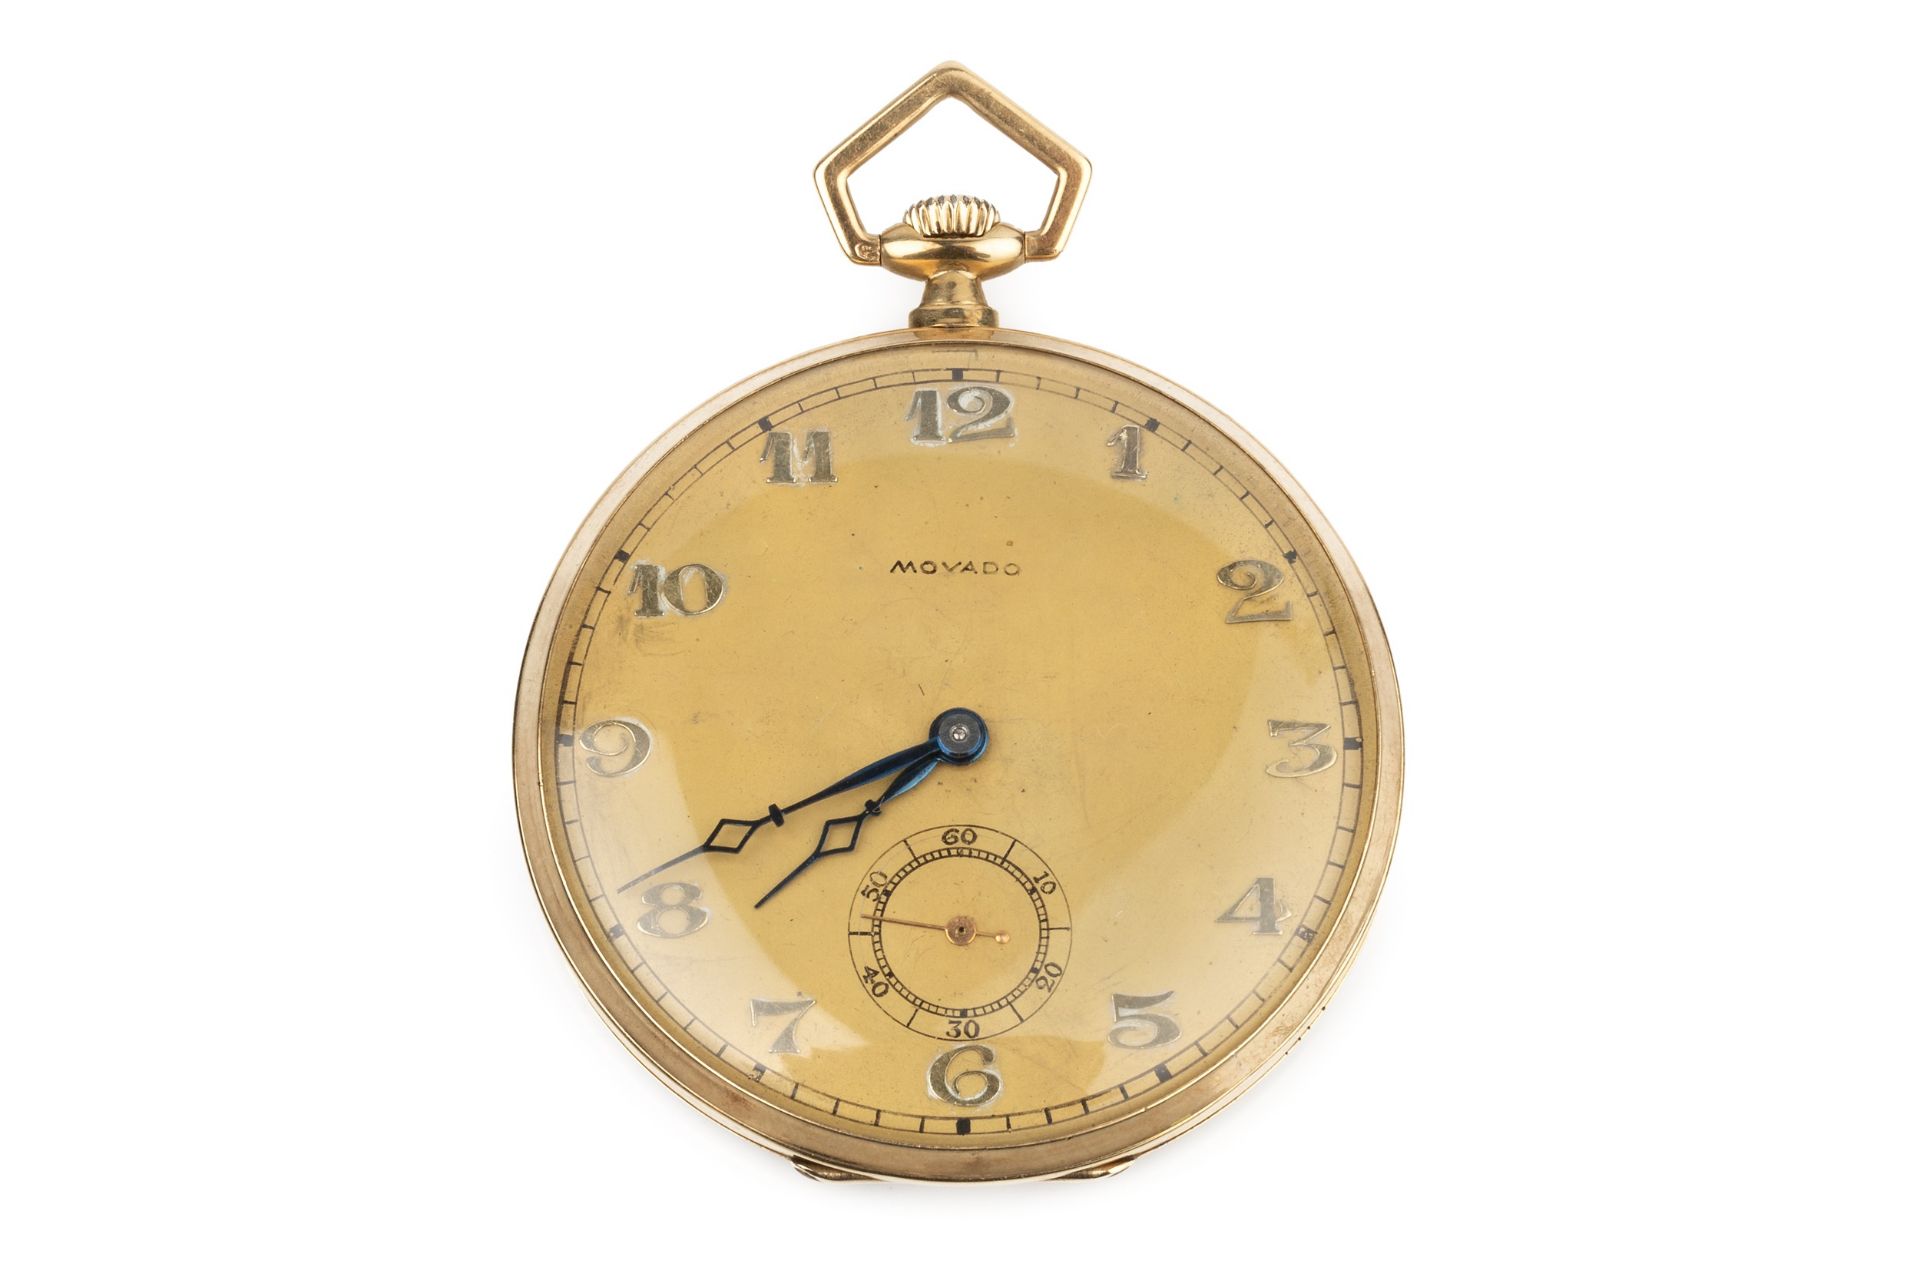 An early 20th century open face pocket watch by Movado, the matt yellow metal dial with Arabic